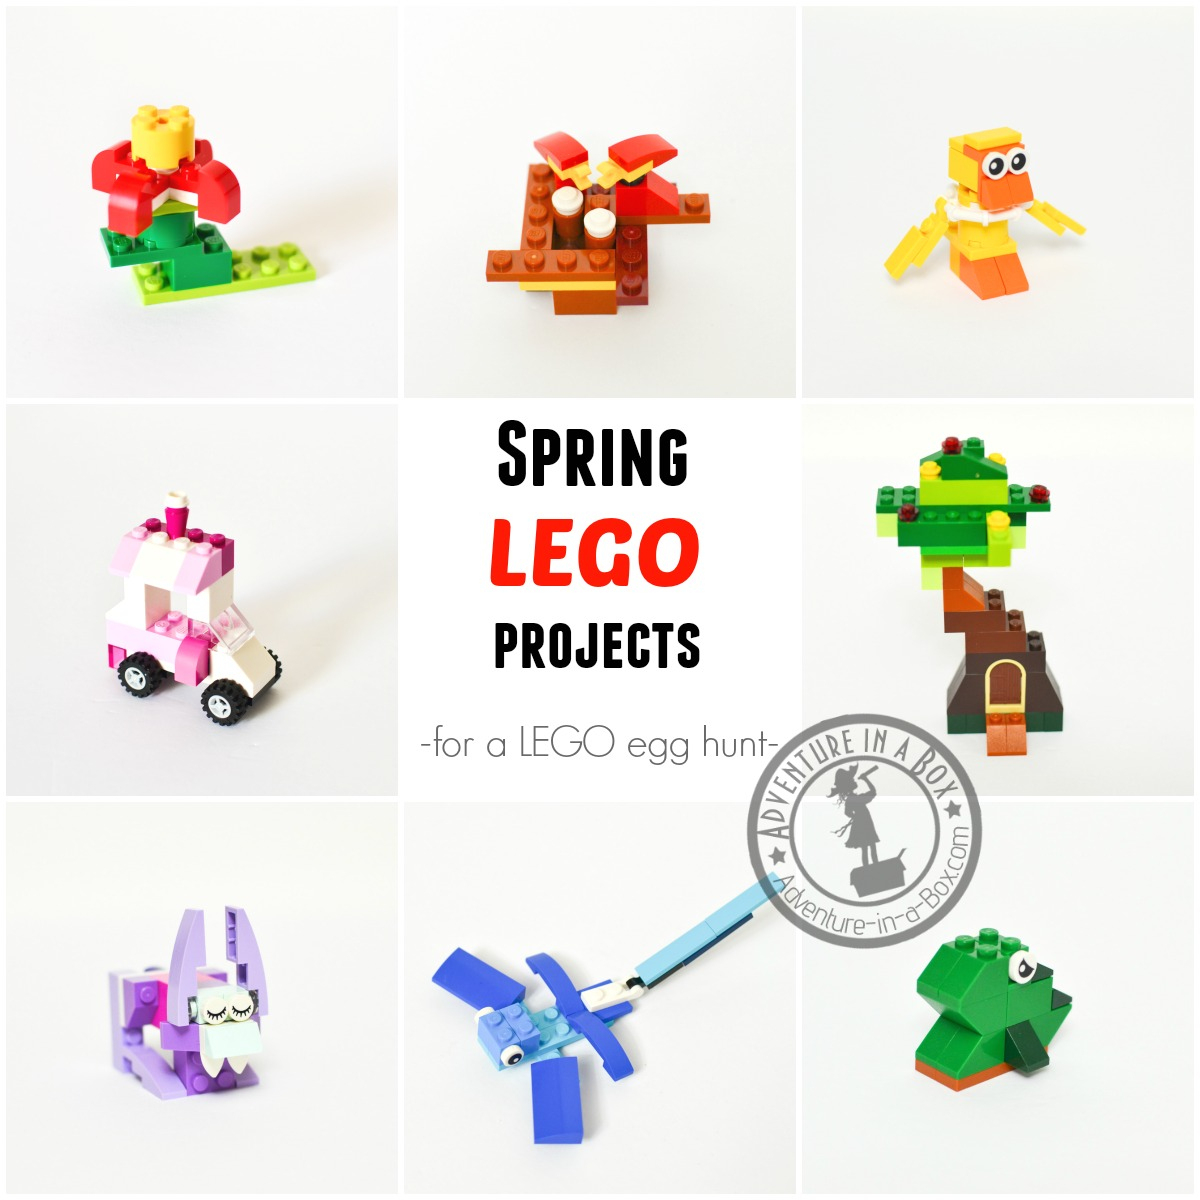 12 Spring Lego Projects For Easter Egg Hunt Or Basket | Adventure In - Free Printable Lego Instructions